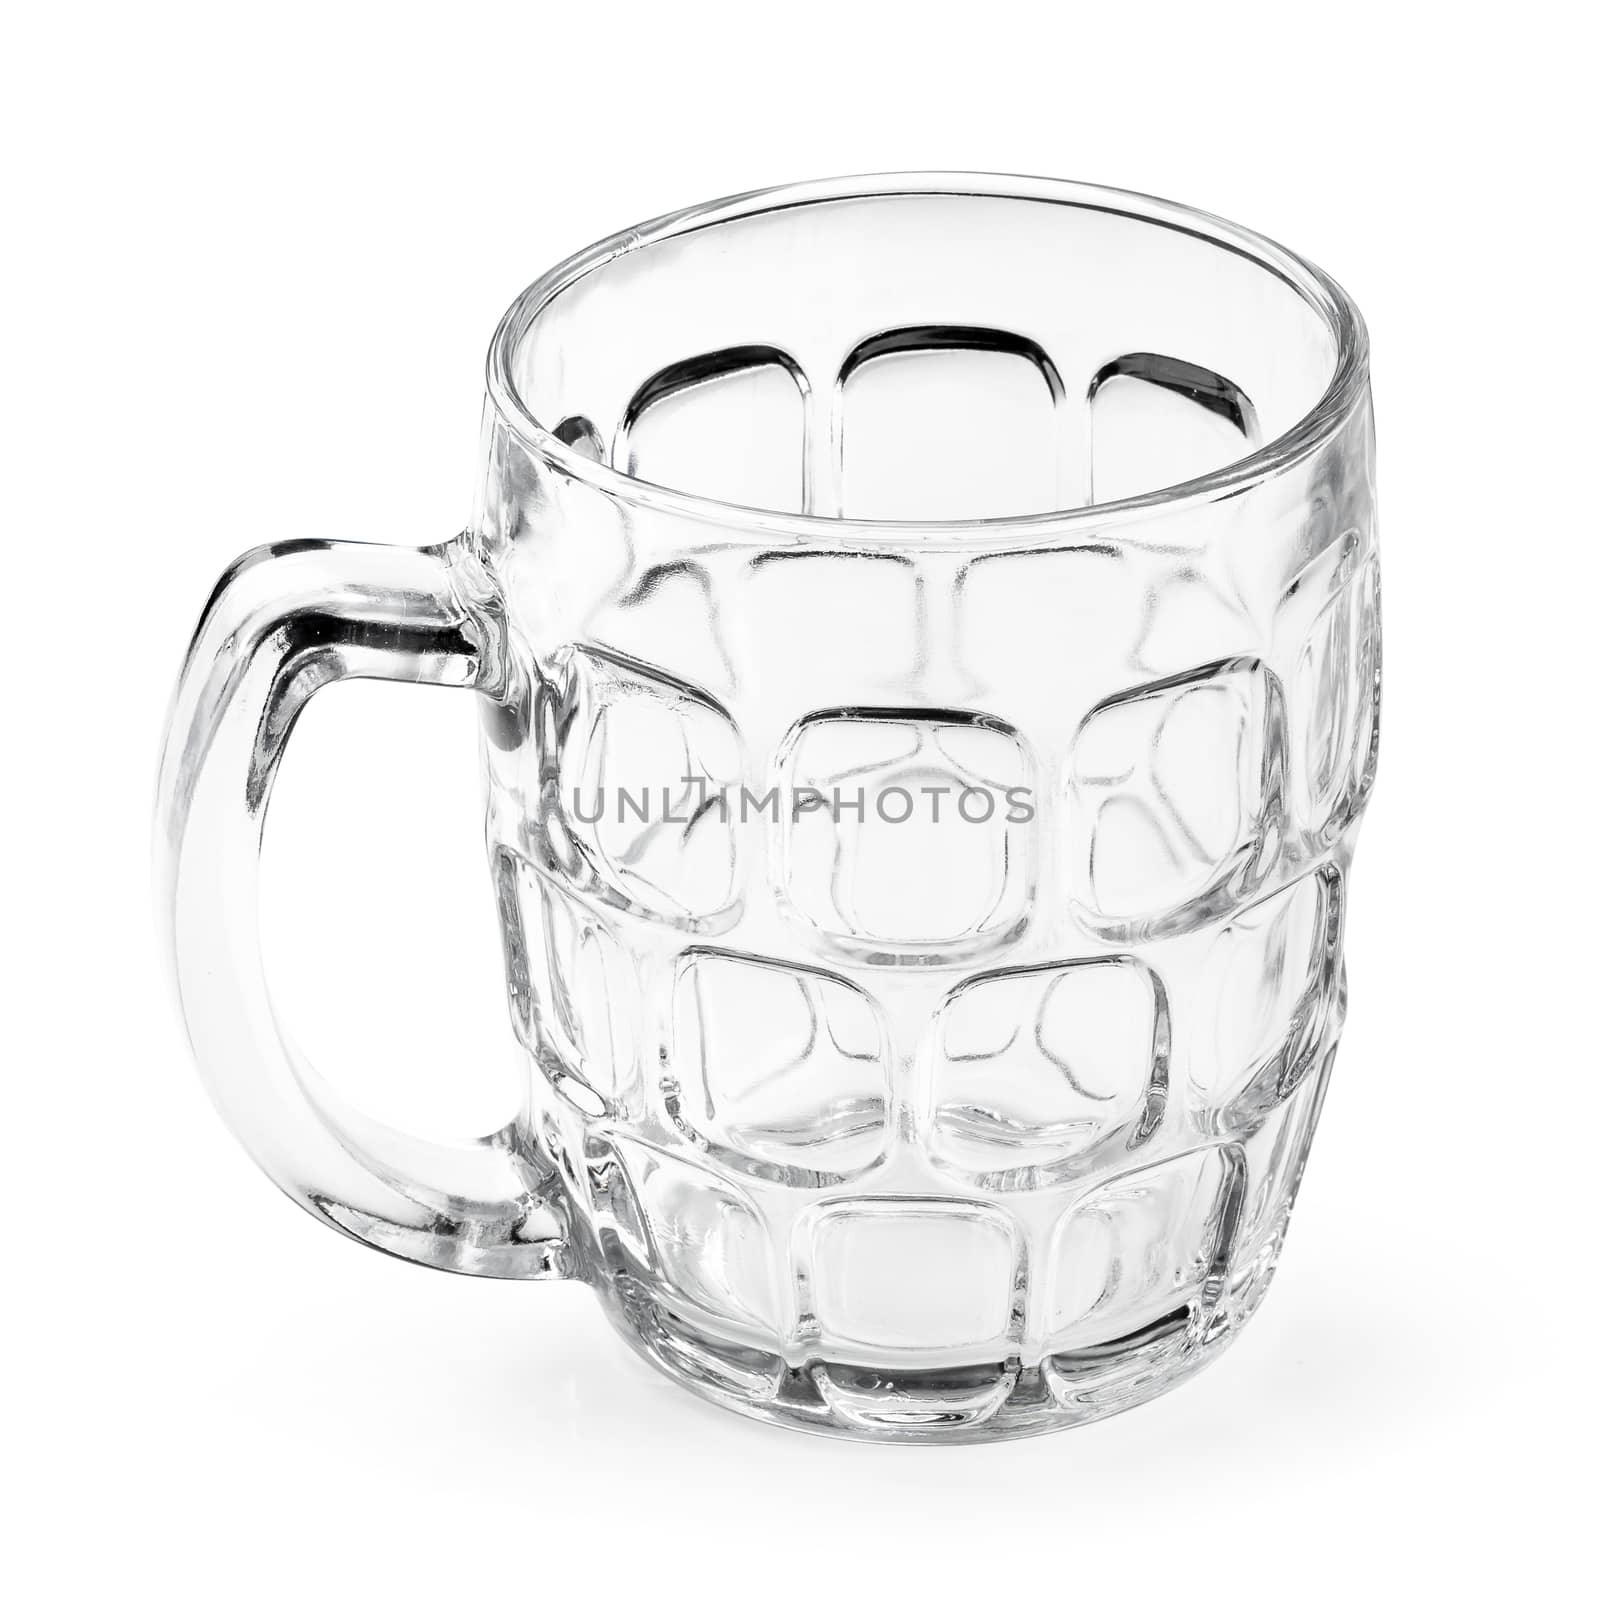 Cocktail glass. Empty beer mug isolated on a white background.